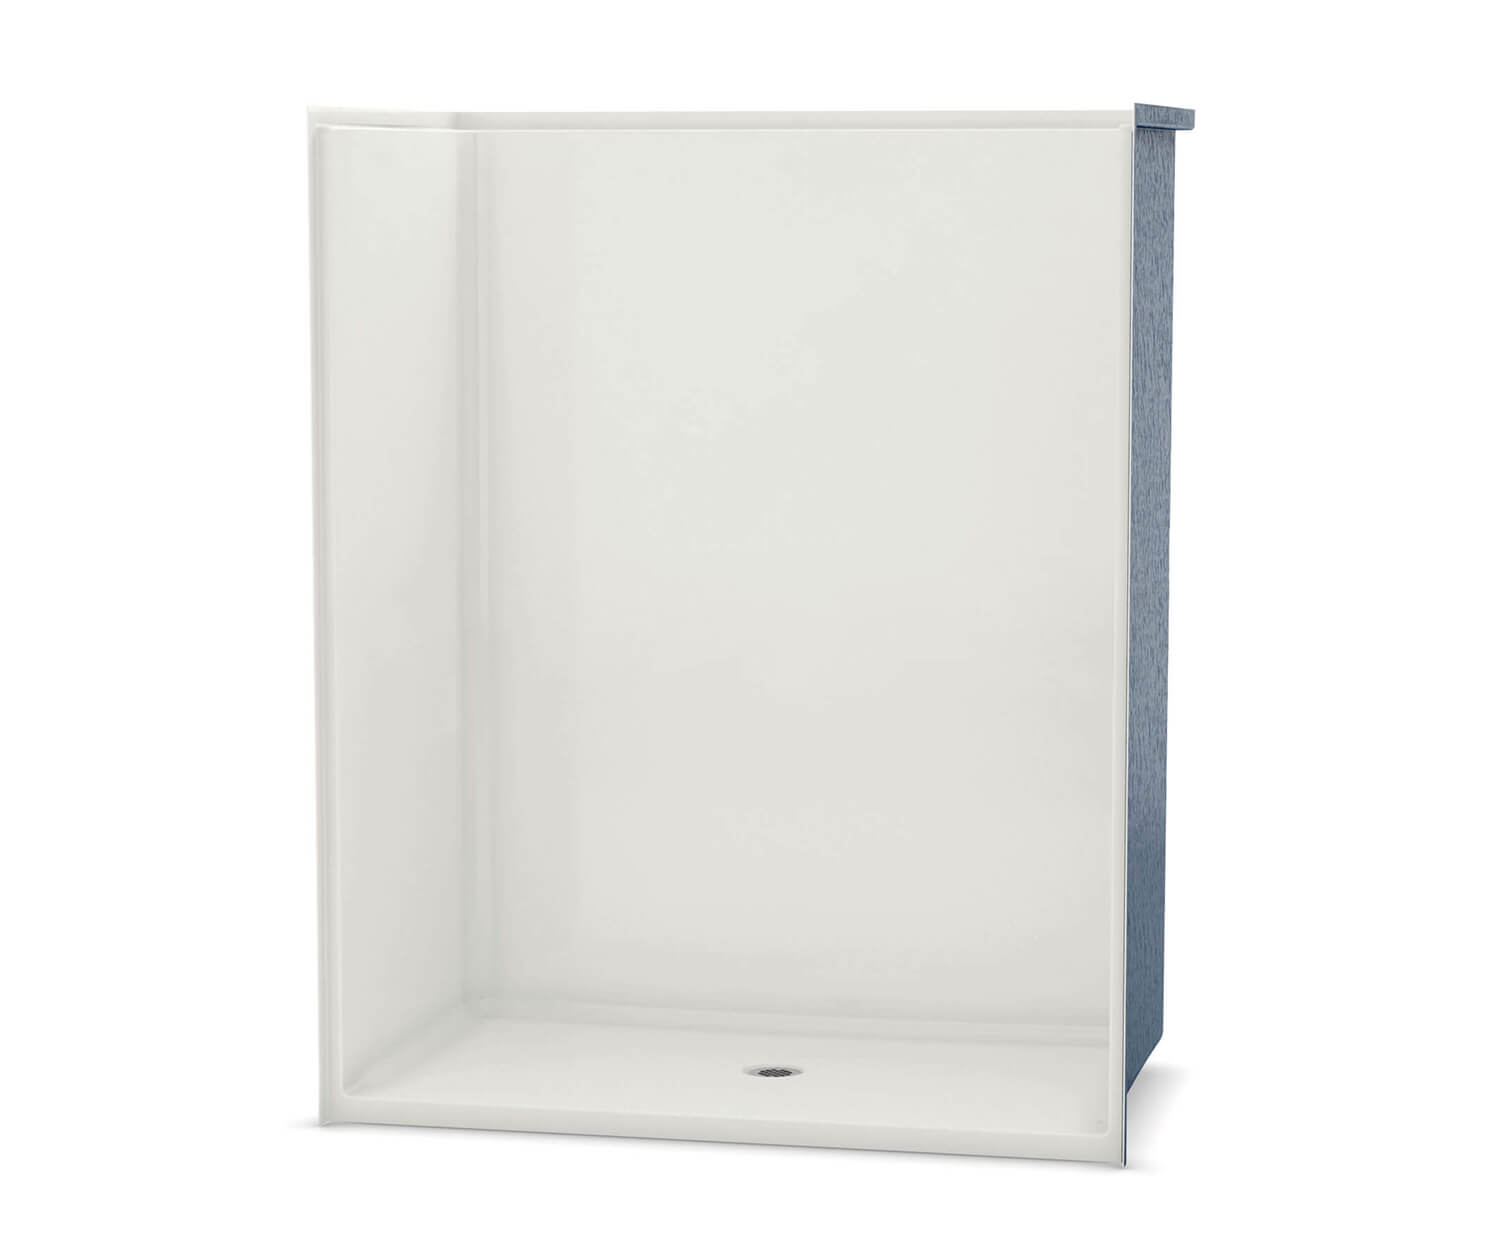 OPS-6034G AcrylX Alcove Center Drain One-Piece Shower in White 